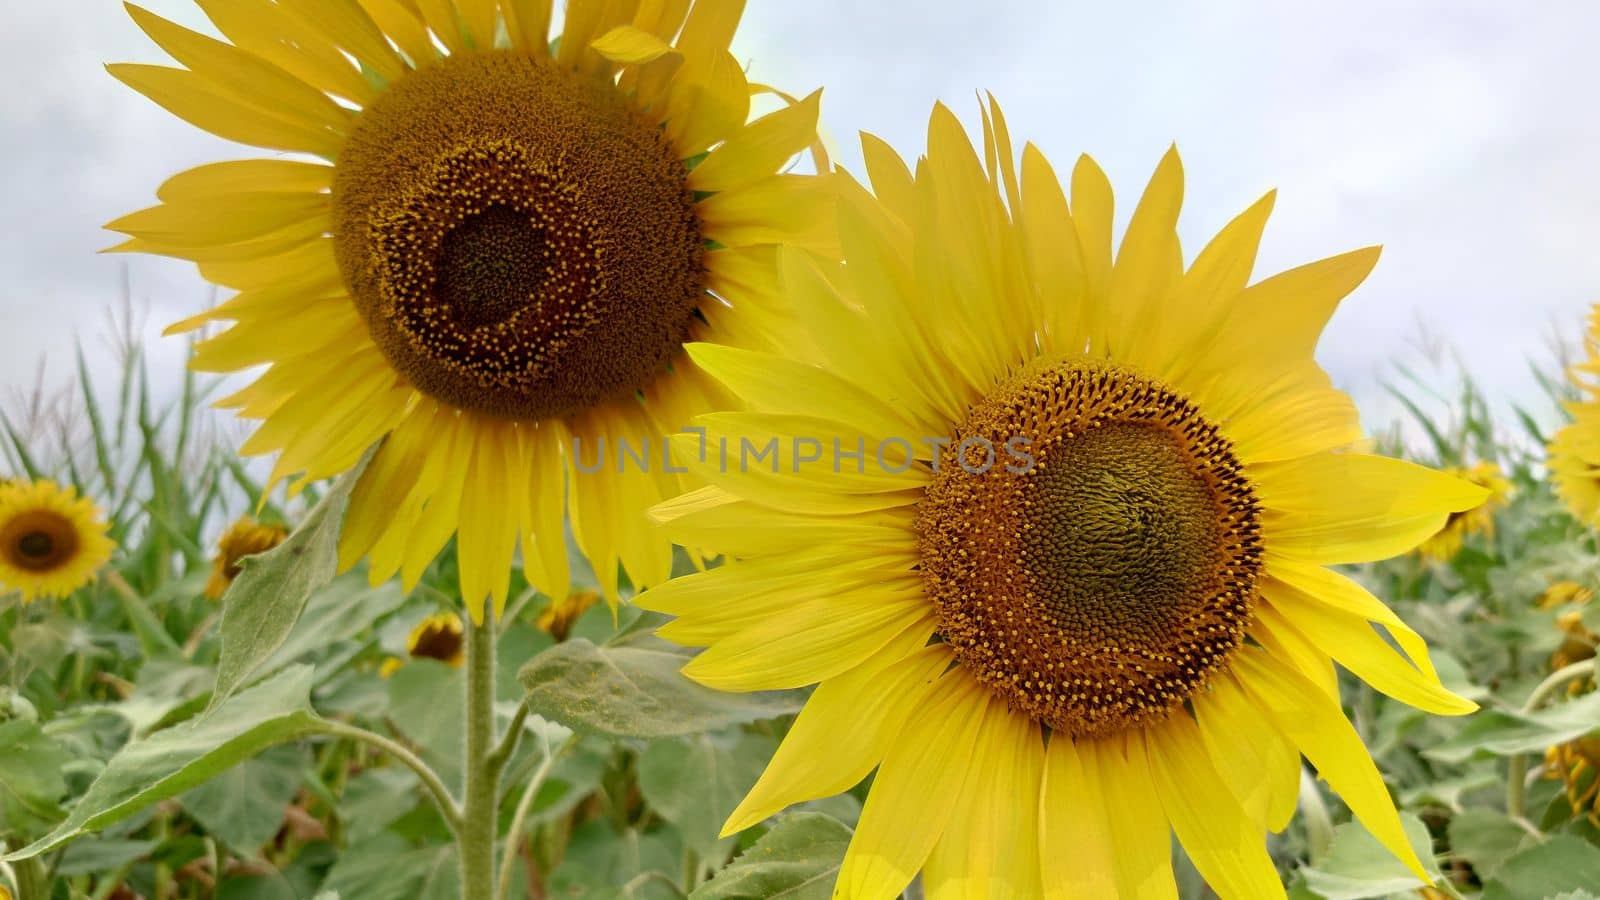 In the foreground are two yellow sunflowers by Mastak80